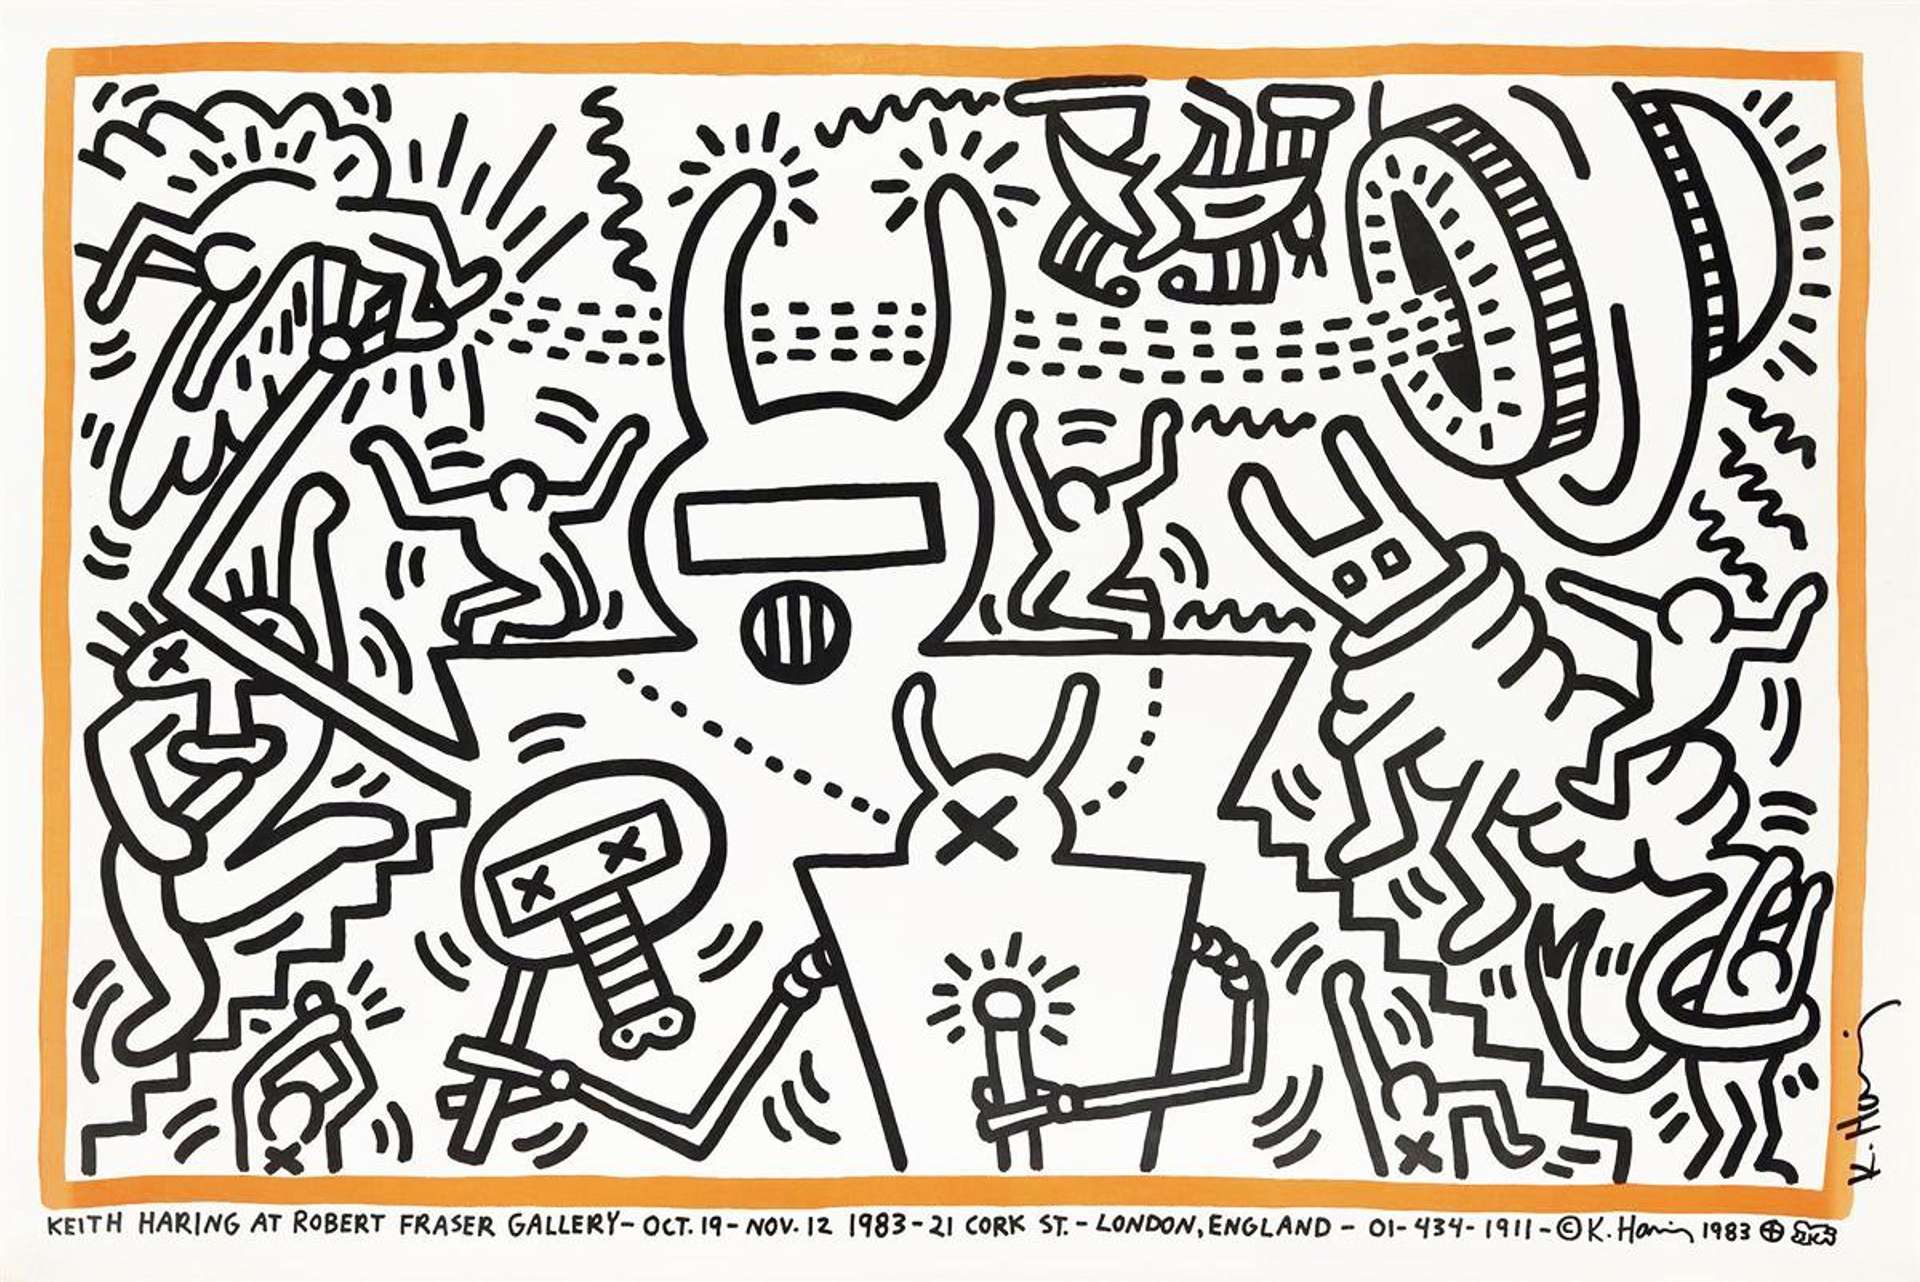 A lithograph by Keith Haring depicting black cartoon figures against a white background, framed by an orange-red line.